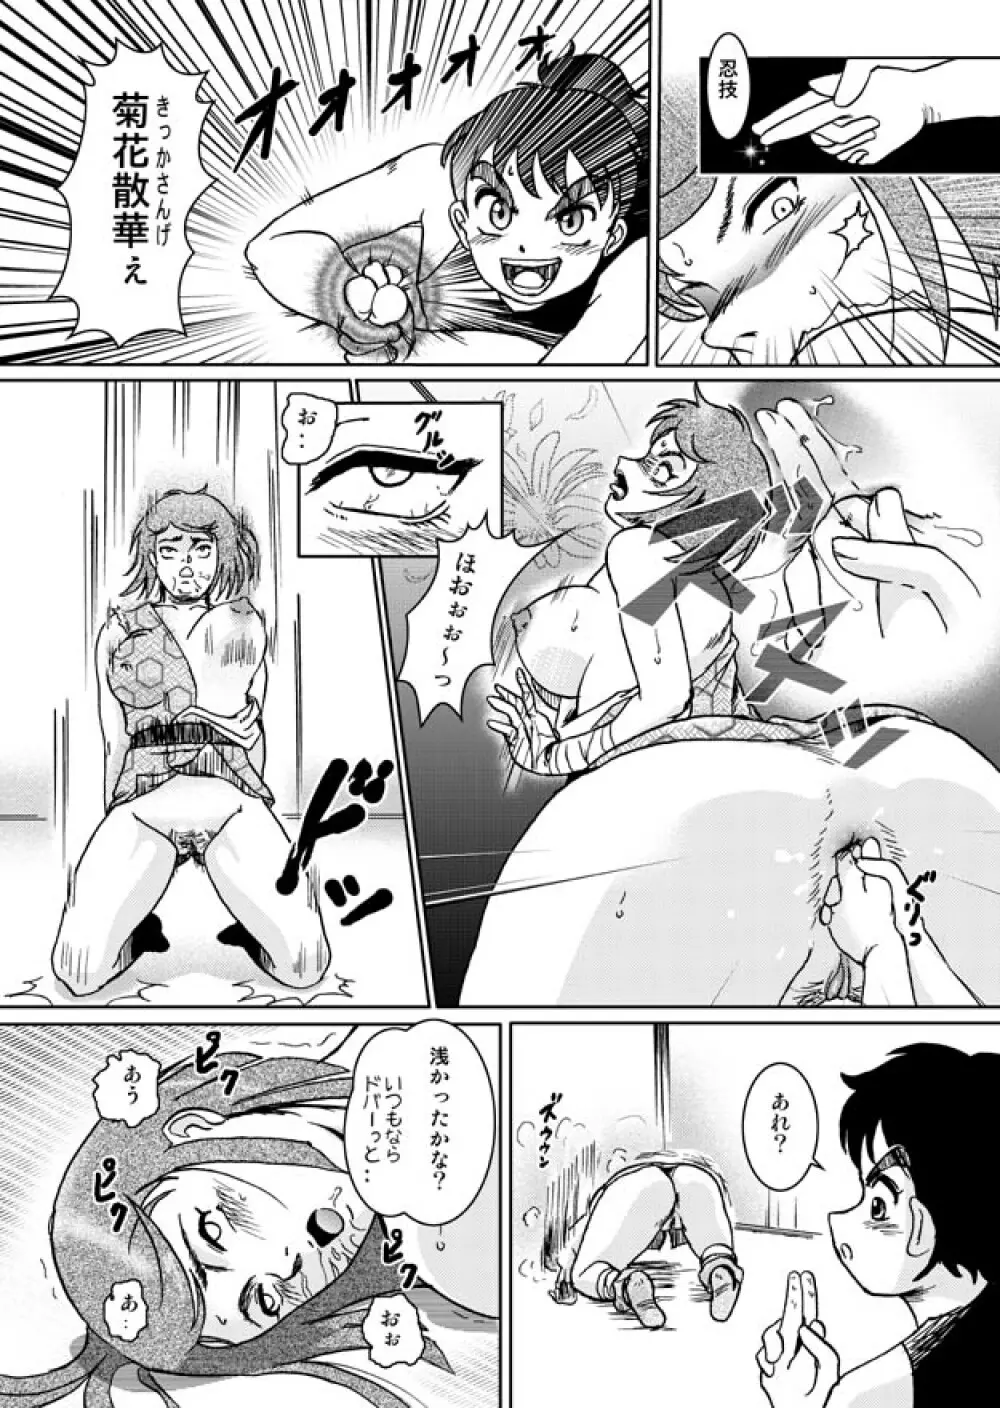 Same-themed manga about kid fighting female ninjas from japanese imageboard. Page.13